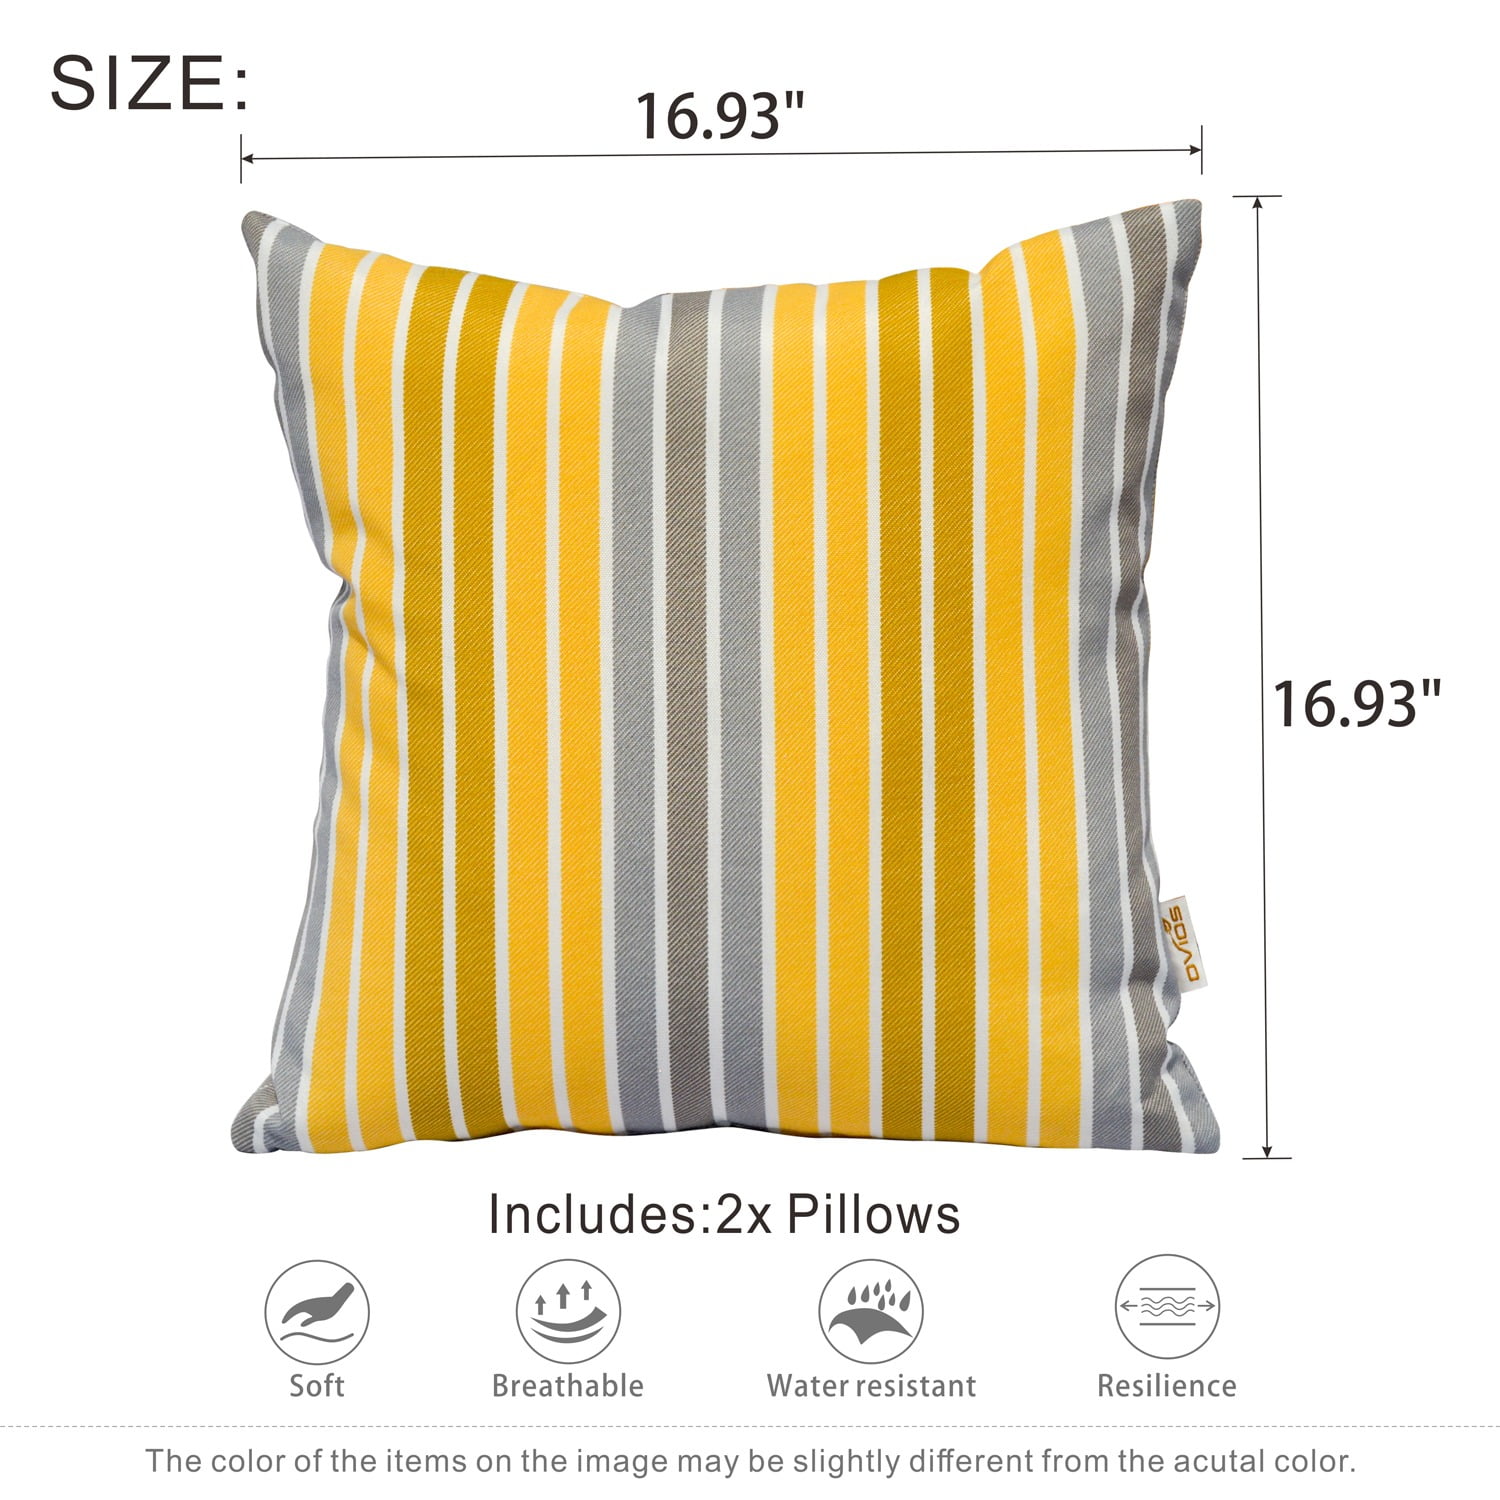 Ovios Indoor Outdoor Throw Pillows Set of 2 with Inserts Patio Furniture  Pillows Includes Pillow Core and Pillowcase, Decorative Pillows for Bed